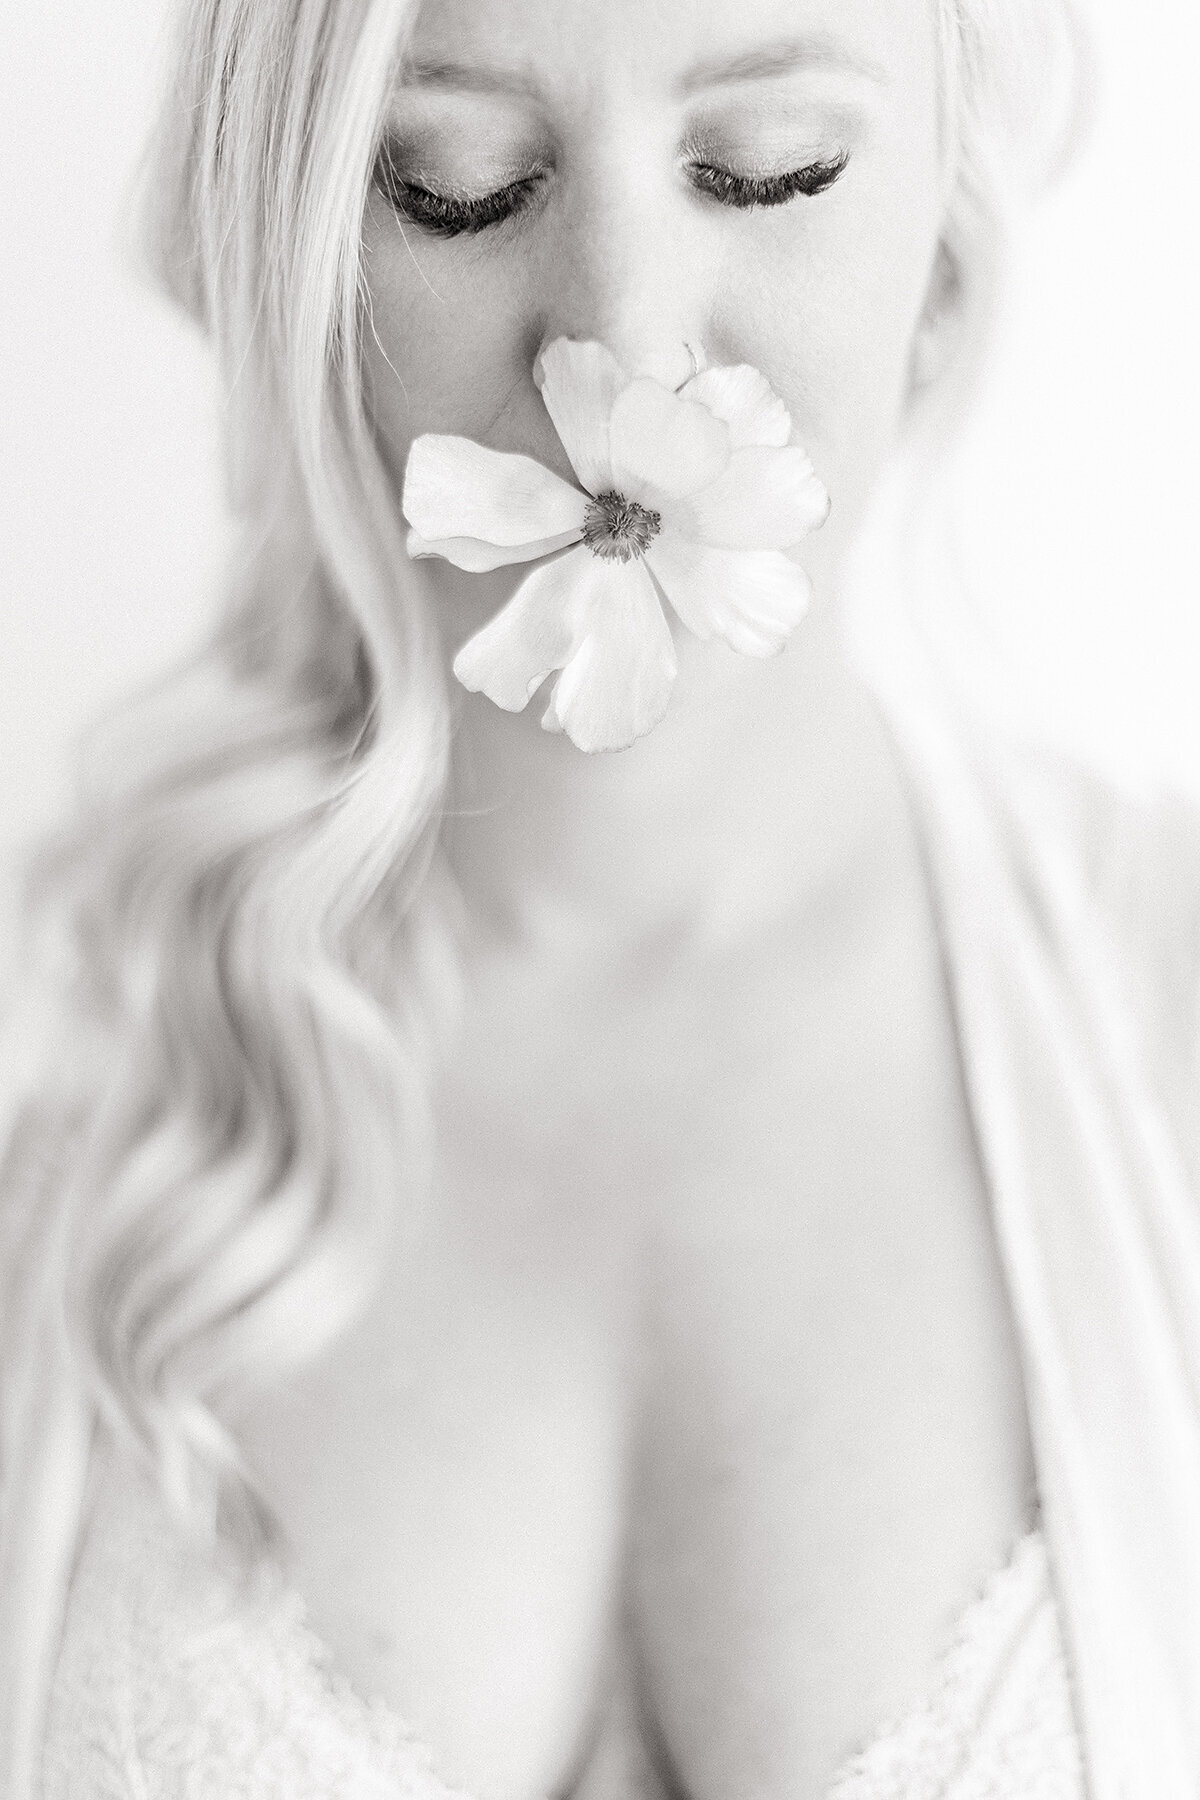 Light filled black and white boudoir photo of a woman wearing lace lingerie while she has a fresh flower in her mouth.